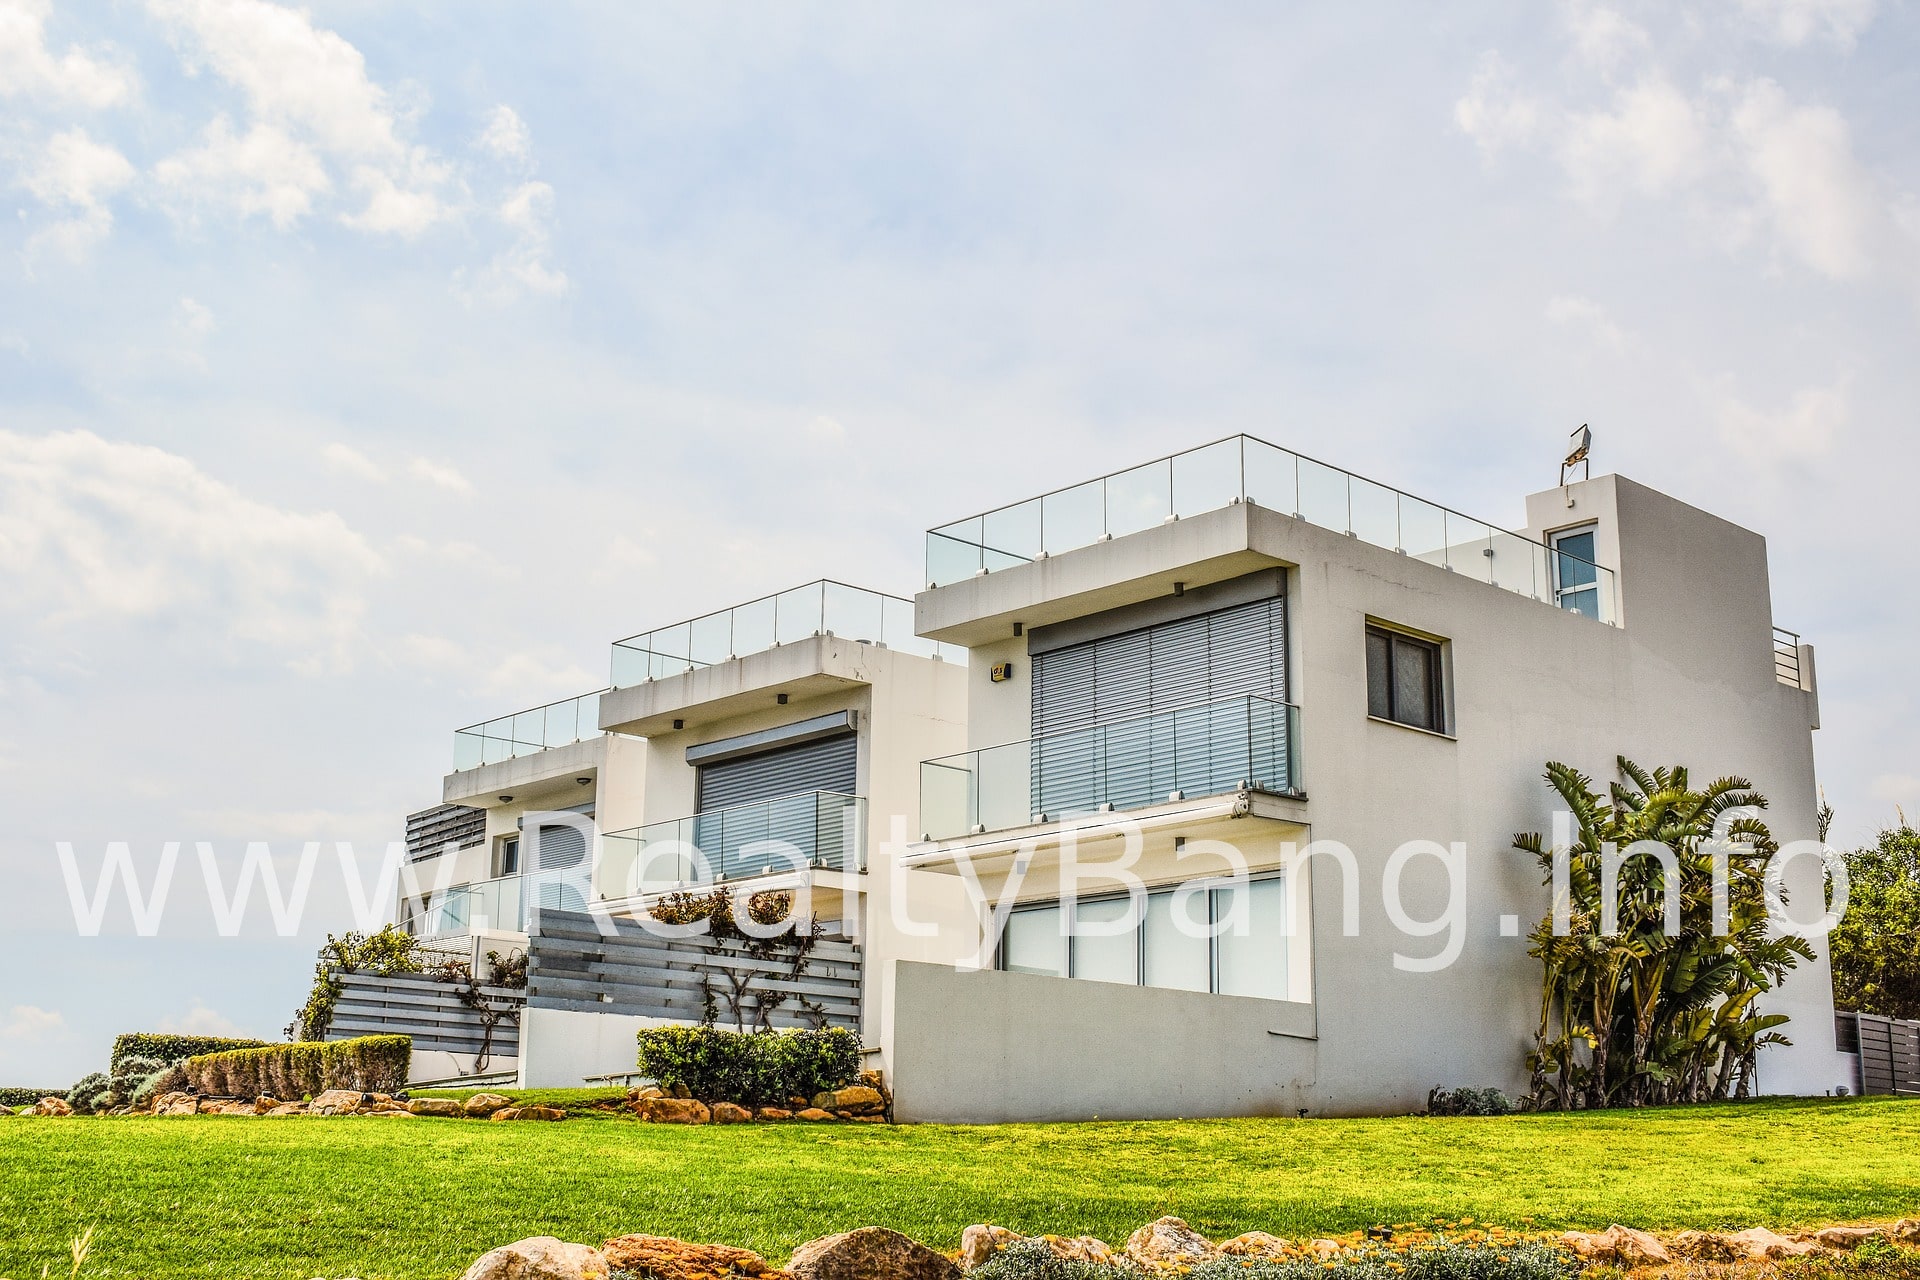 Real Estate Market in Cyprus